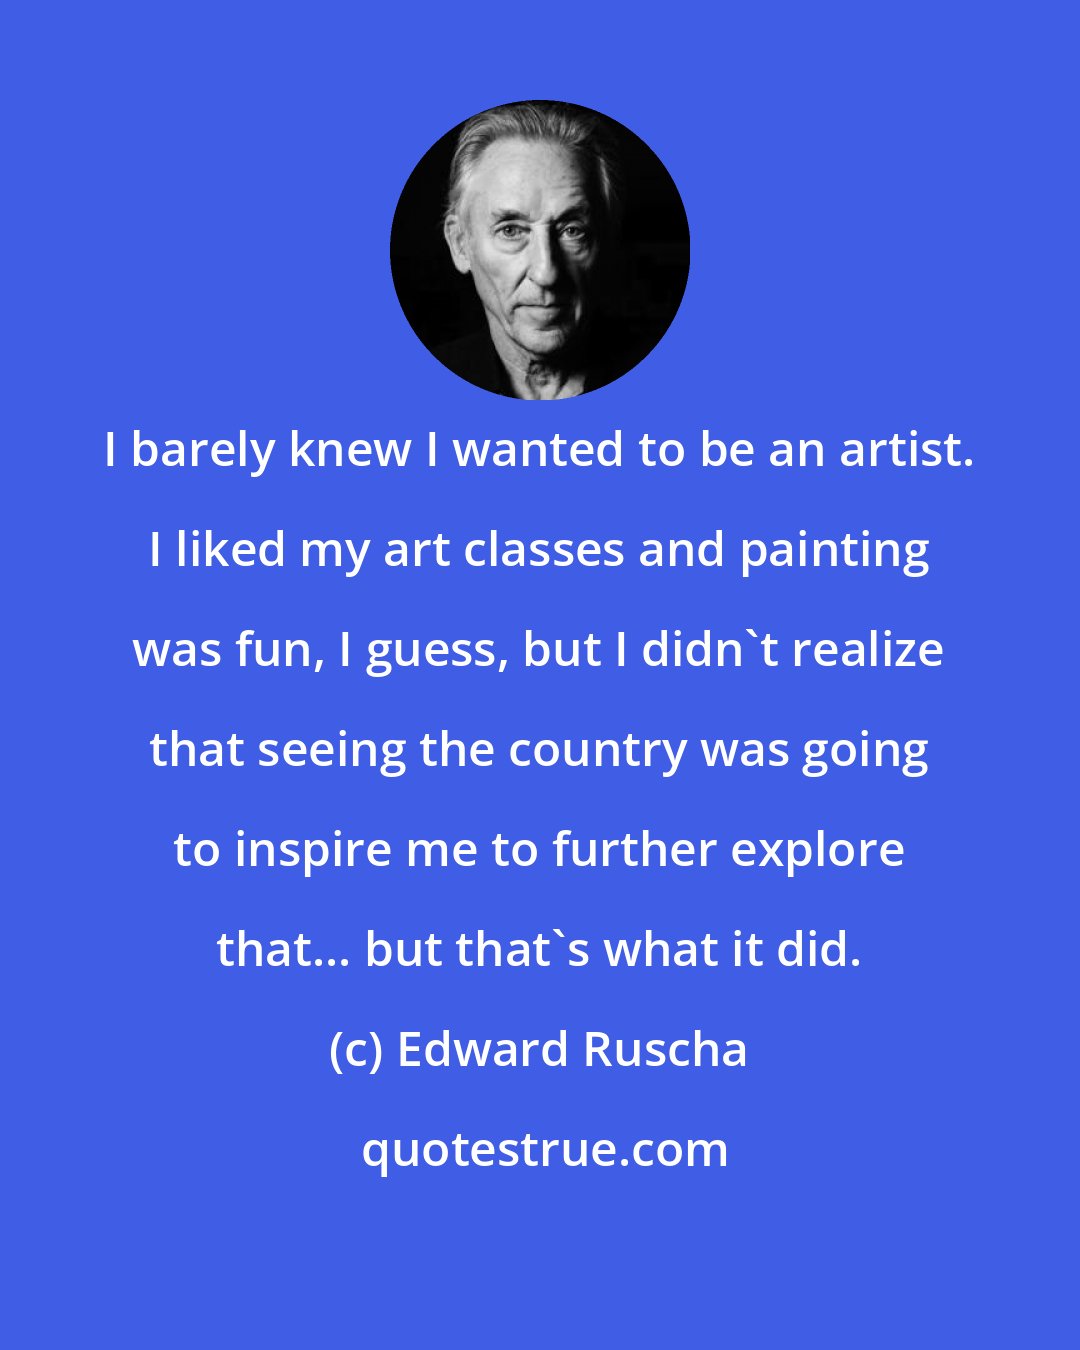 Edward Ruscha: I barely knew I wanted to be an artist. I liked my art classes and painting was fun, I guess, but I didn't realize that seeing the country was going to inspire me to further explore that... but that's what it did.